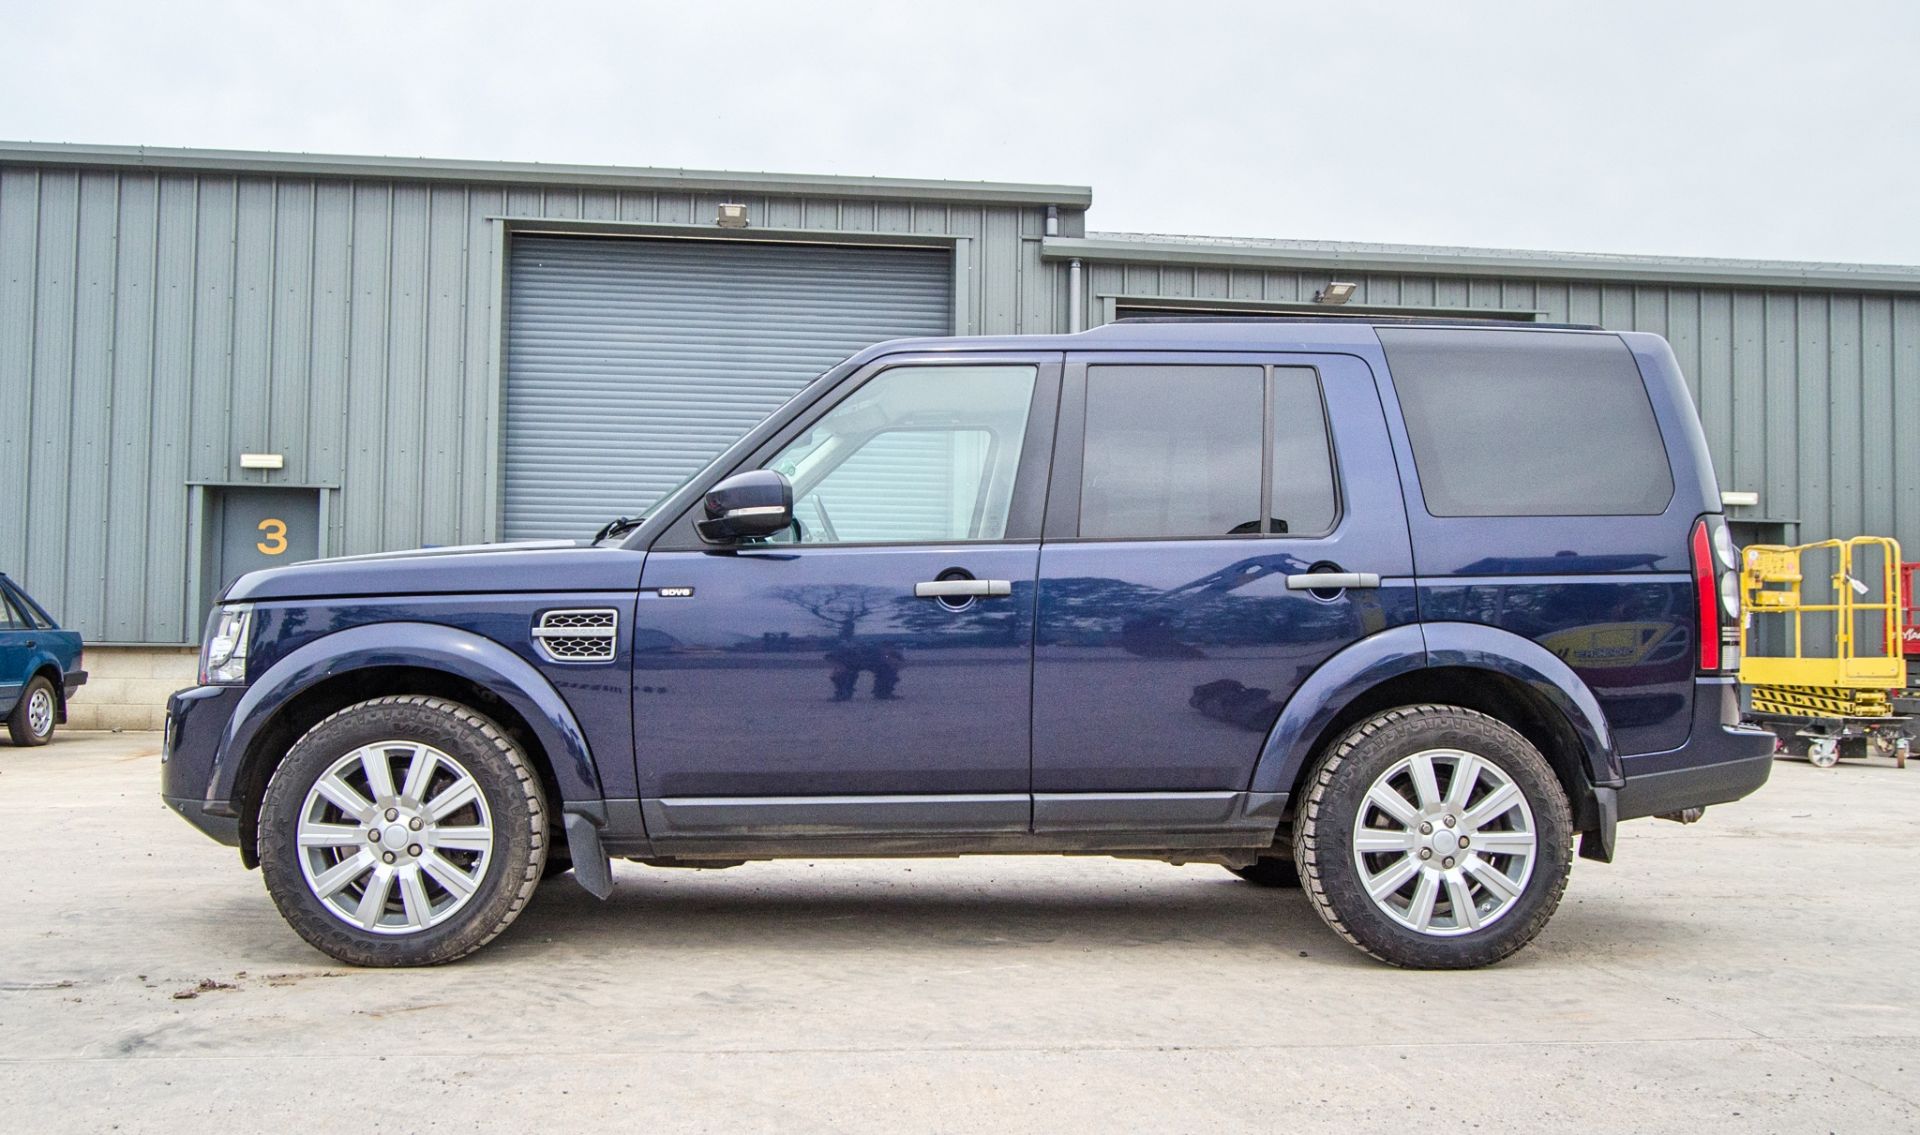 Land Rover Discovery 4 3.0 SDV6 SE Commercial auto 4 wheel drive utility vehicle  Registration - Image 7 of 39